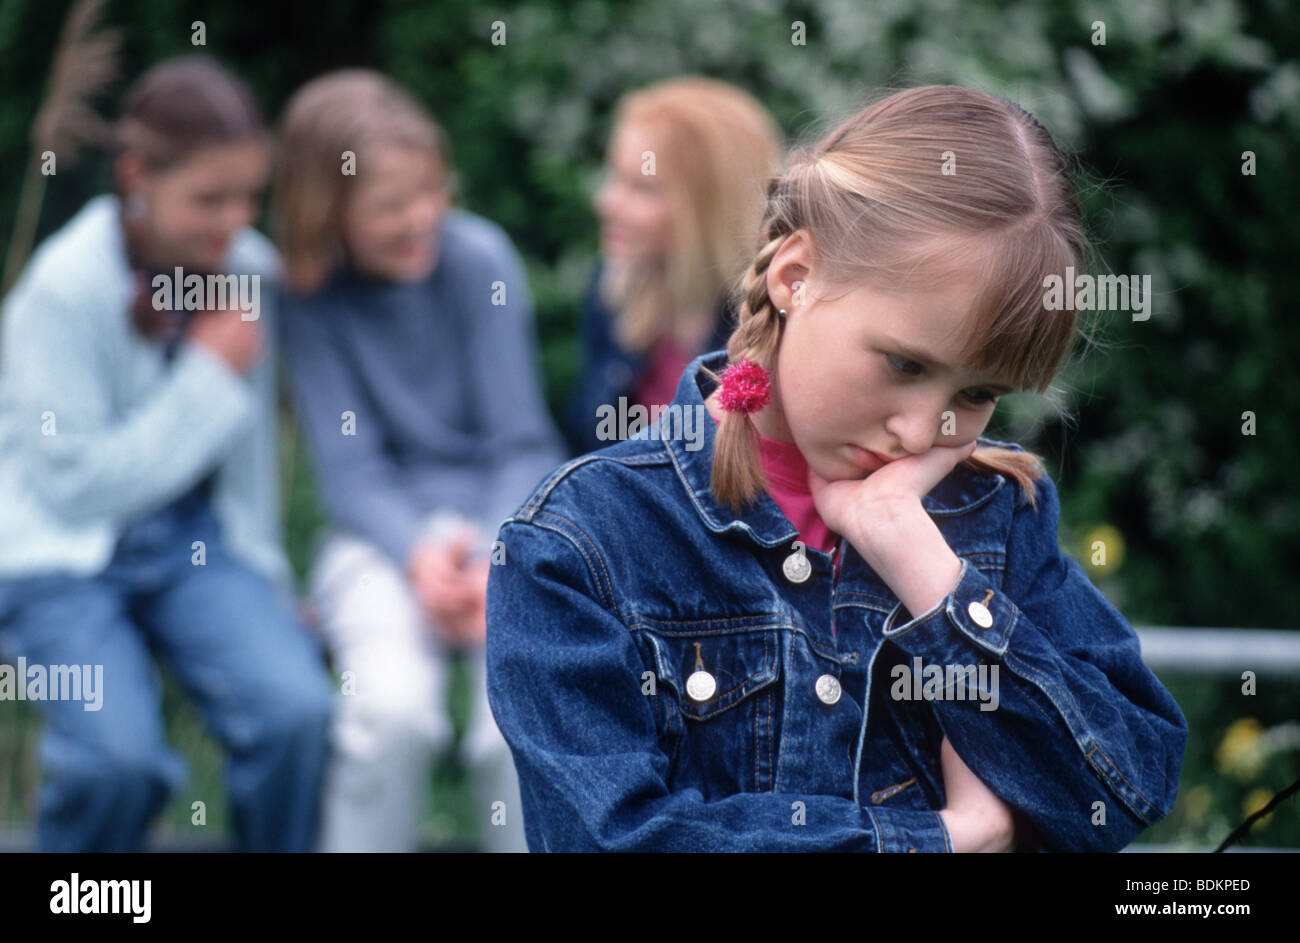 Child feels left out by clique or not making friends easily, she is looking down SerieCVS100008063 Stock Photo